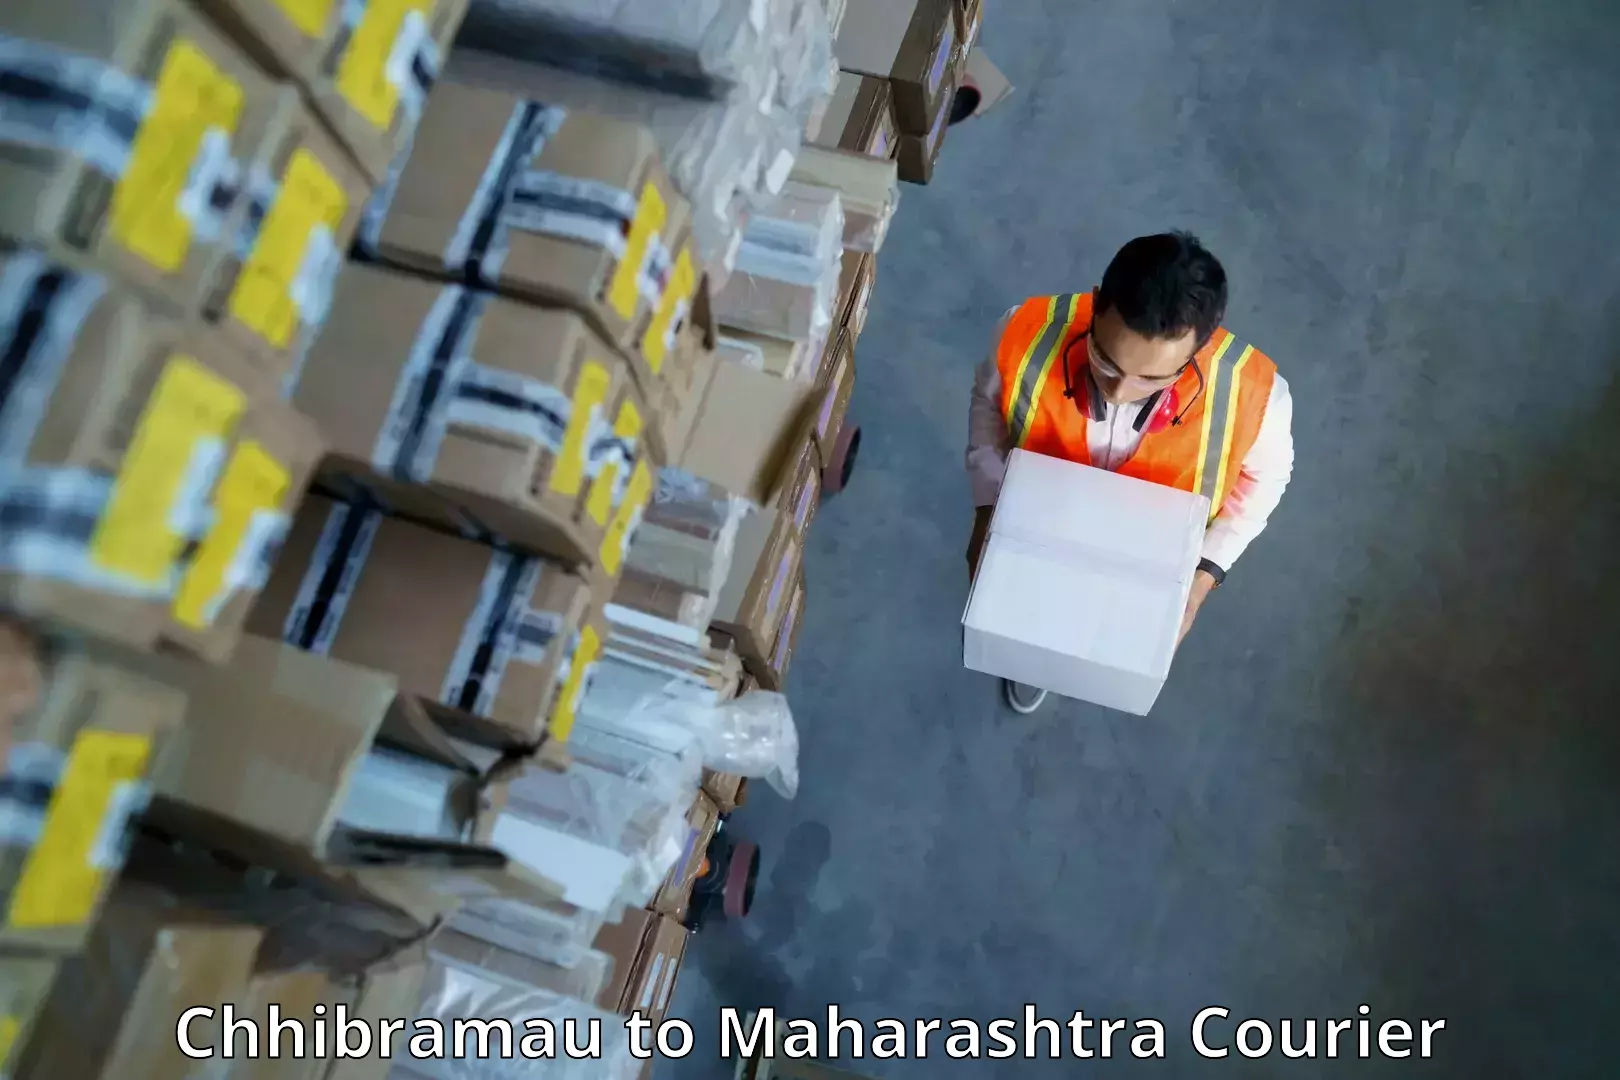 Easy access courier services in Chhibramau to Sawantwadi